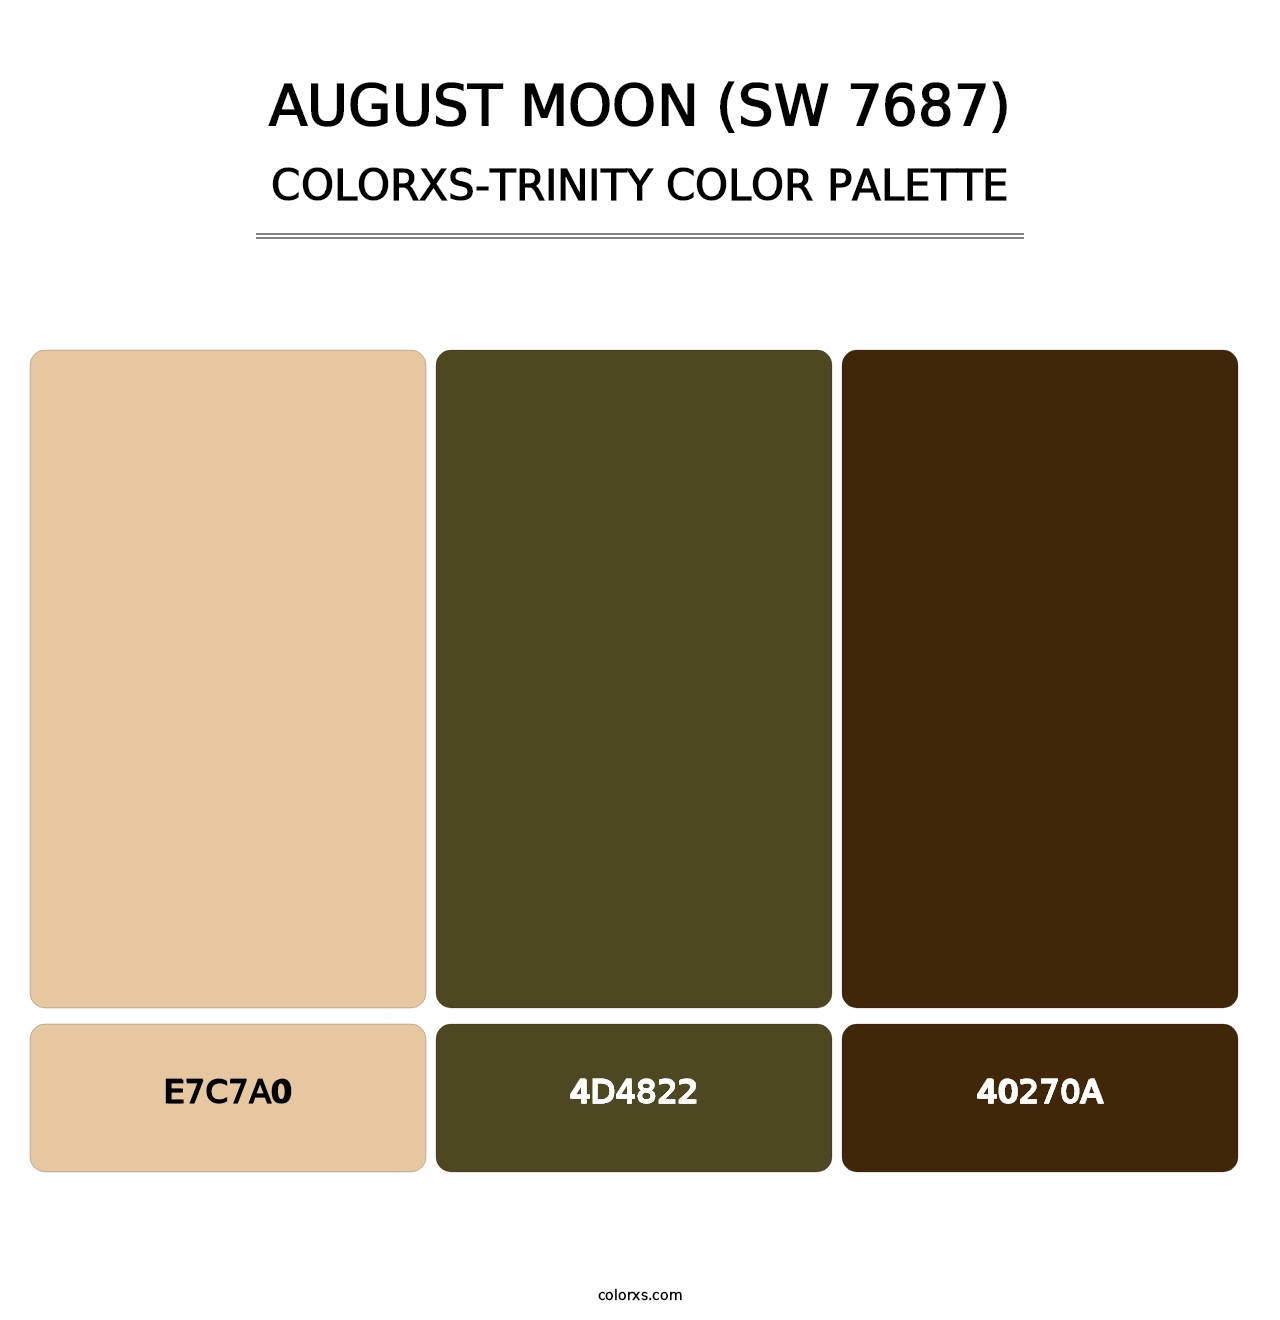 August Moon (SW 7687) - Colorxs Trinity Palette